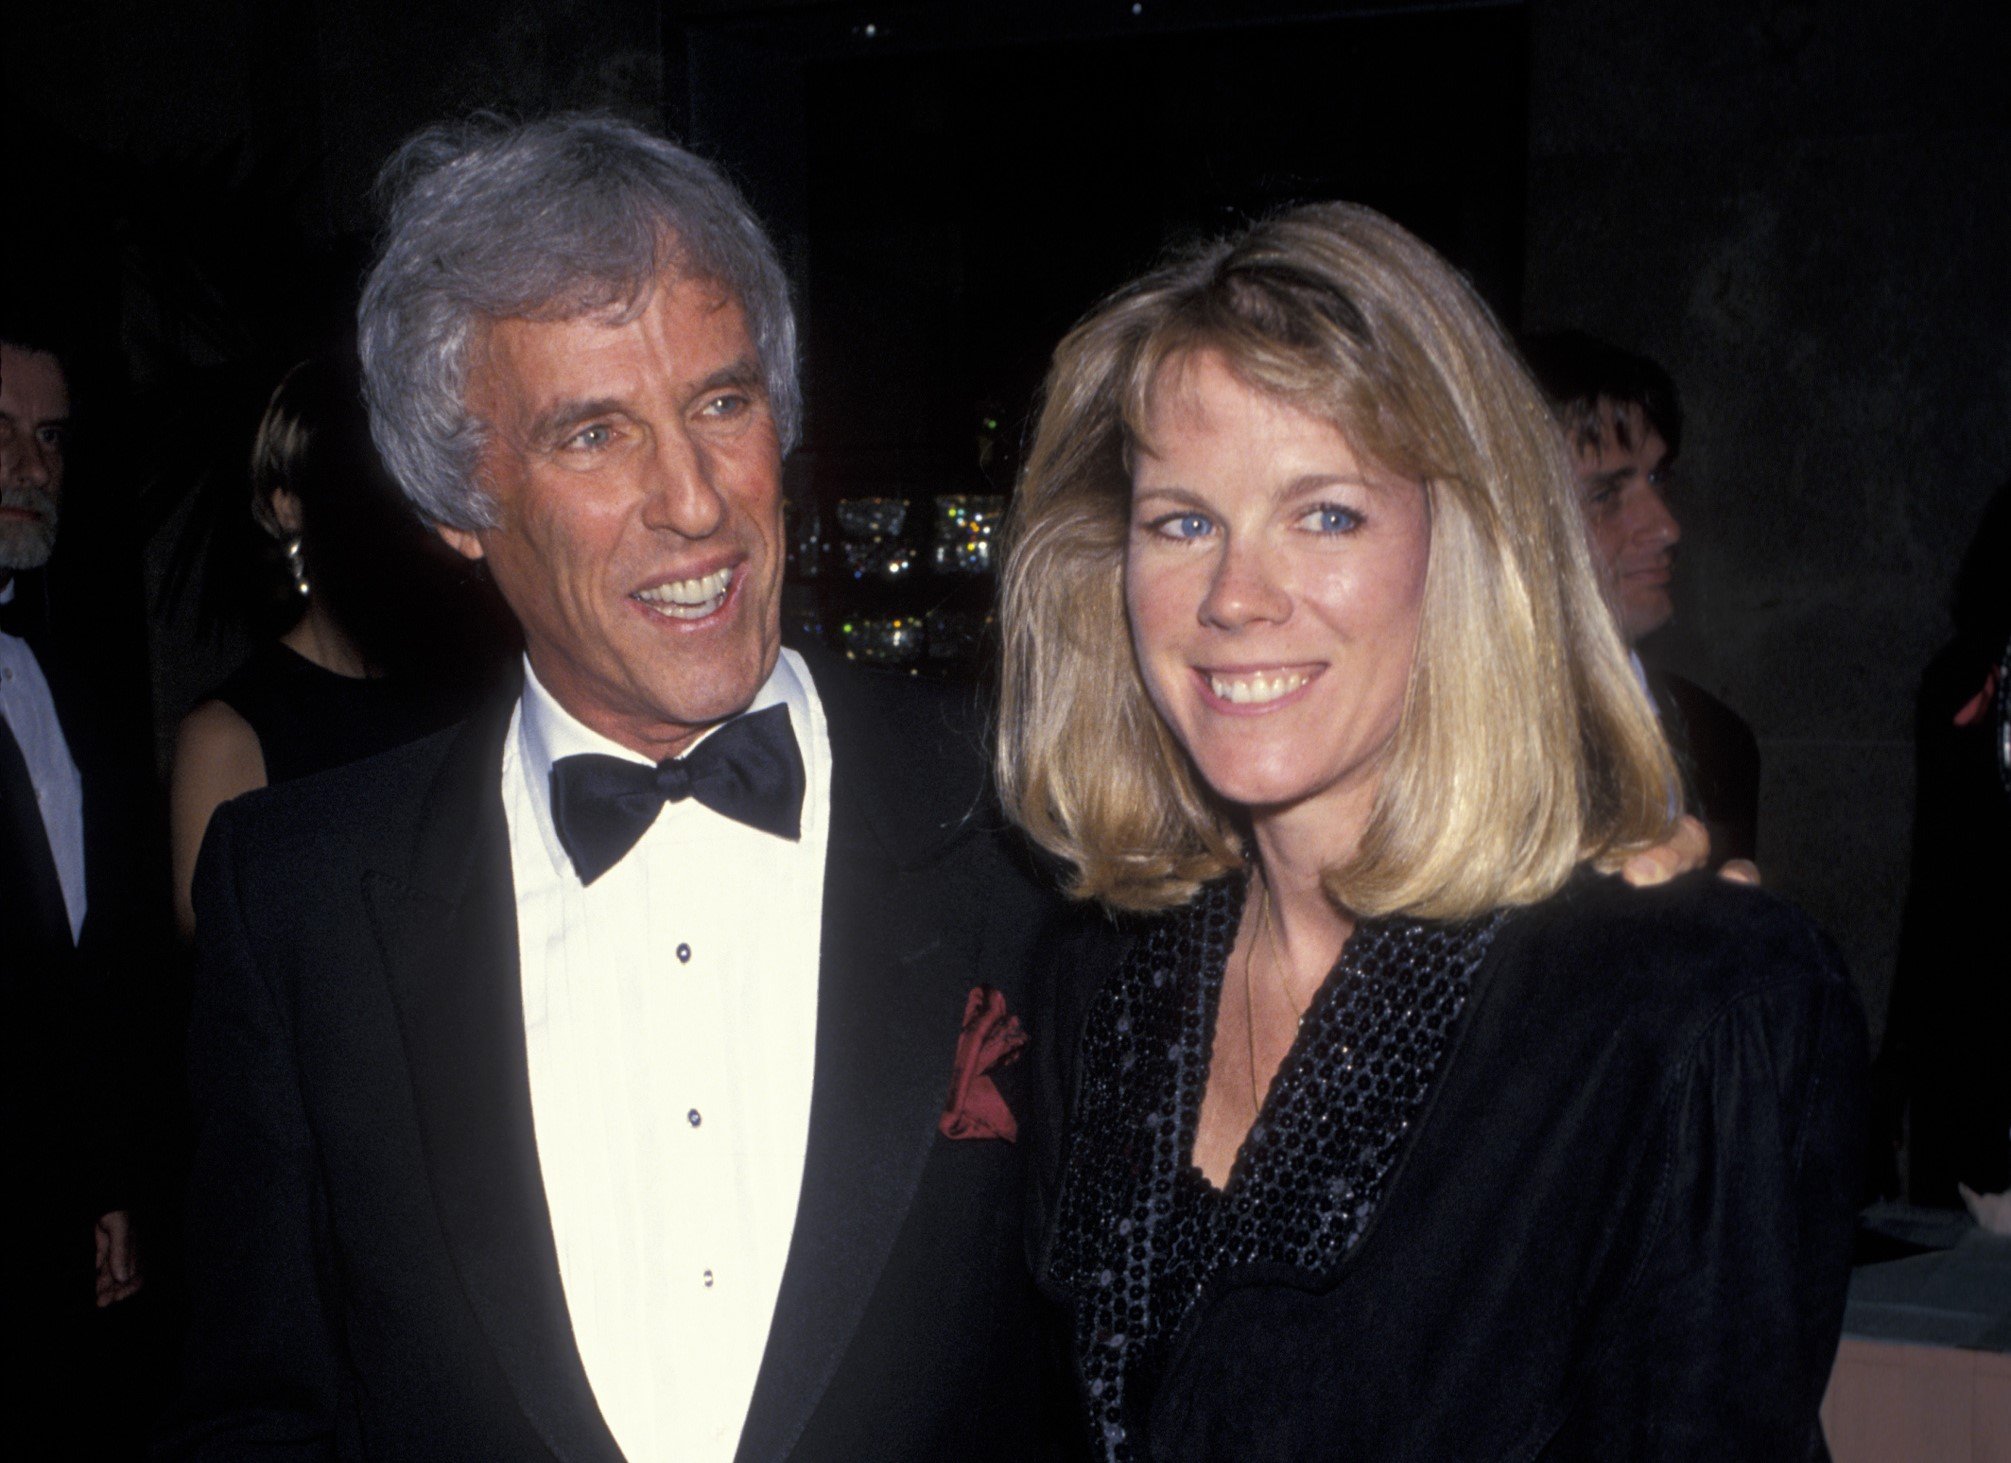 Burt Bacharach and Jane Hansen during ASCAP Honors Jimmy Jam and Terry in Beverly Hills, California, on May 24, 1993. | Source: Getty Images